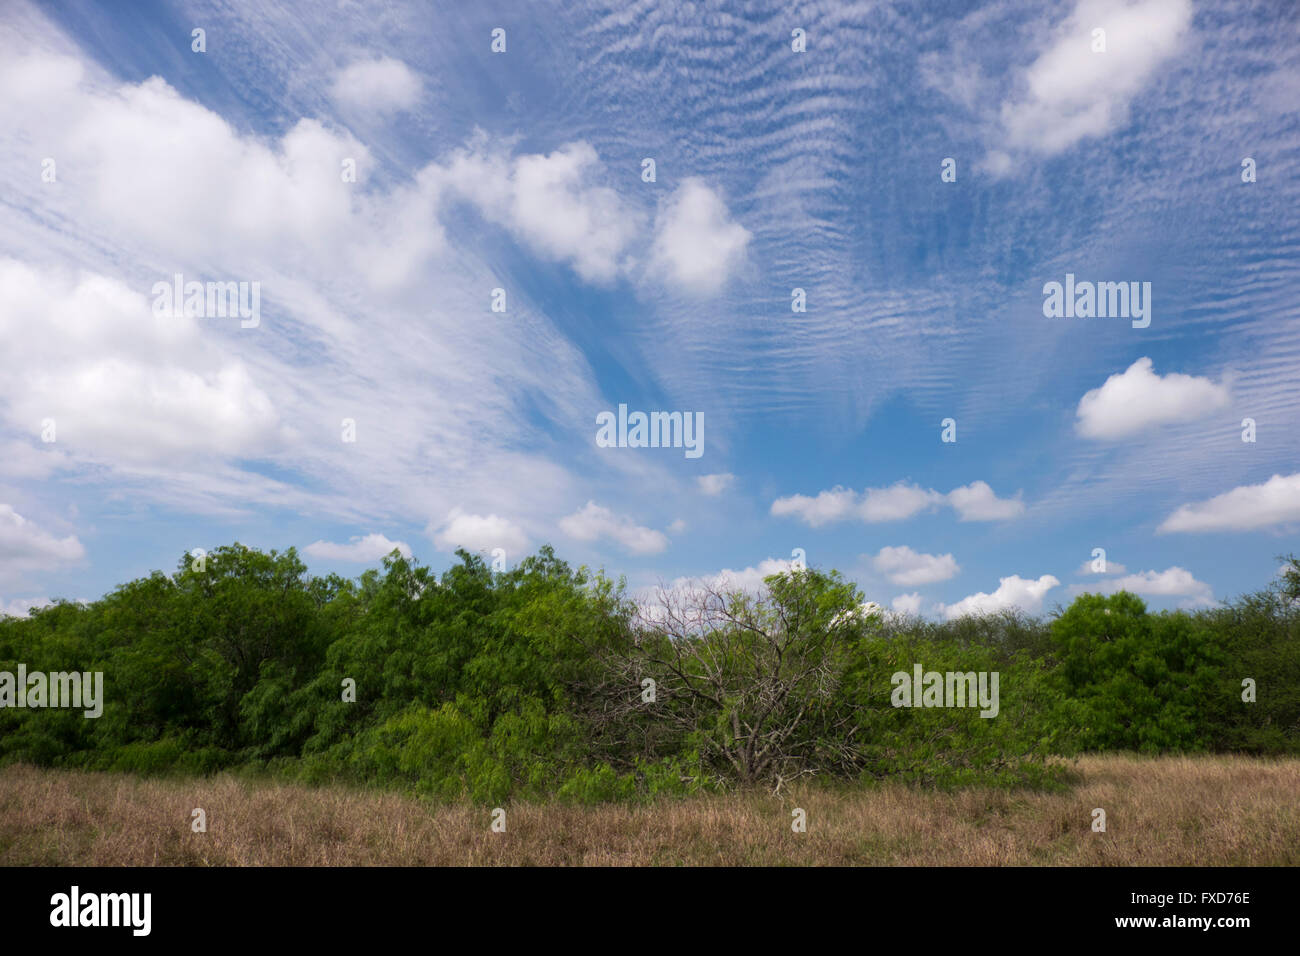 A thicket of Honey Mesquite and Ebony trees stand beneath a vivid blue sky, fluffy cirrus and cumulus clouds. Stock Photo